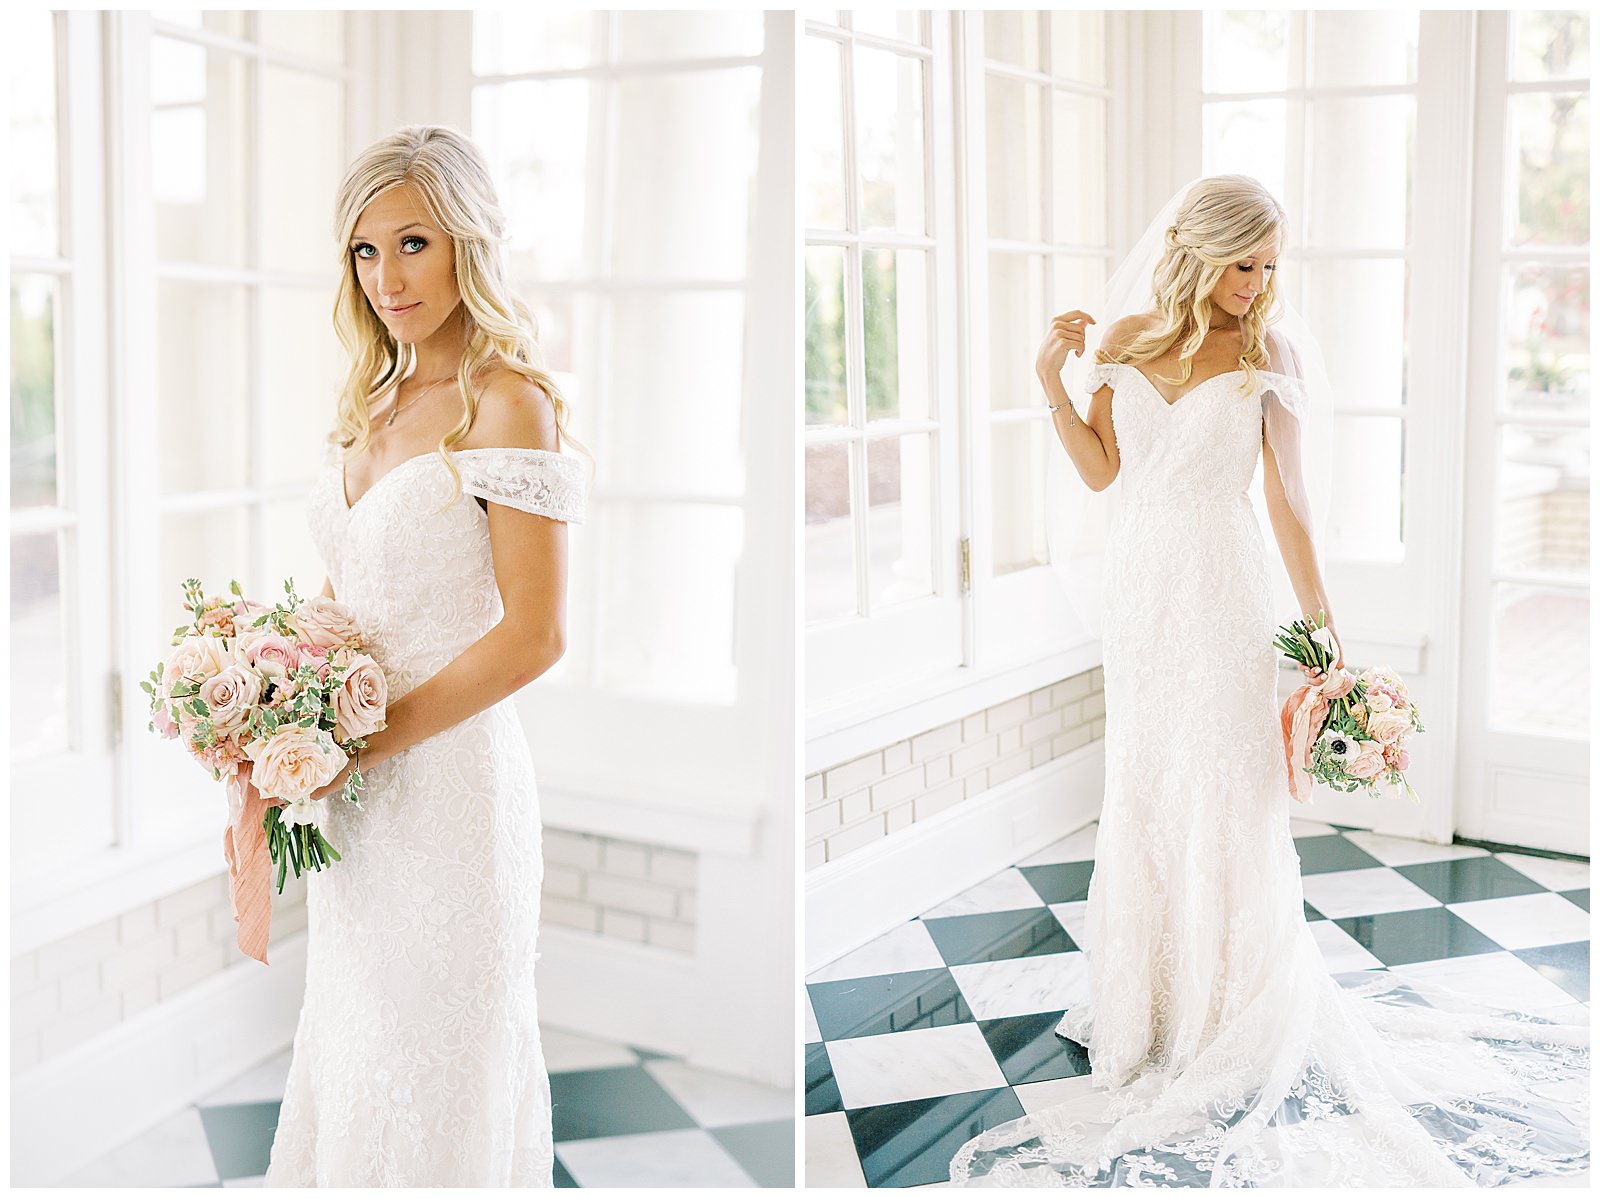 blond haired bride portraits in separk mansion black and white ballroom